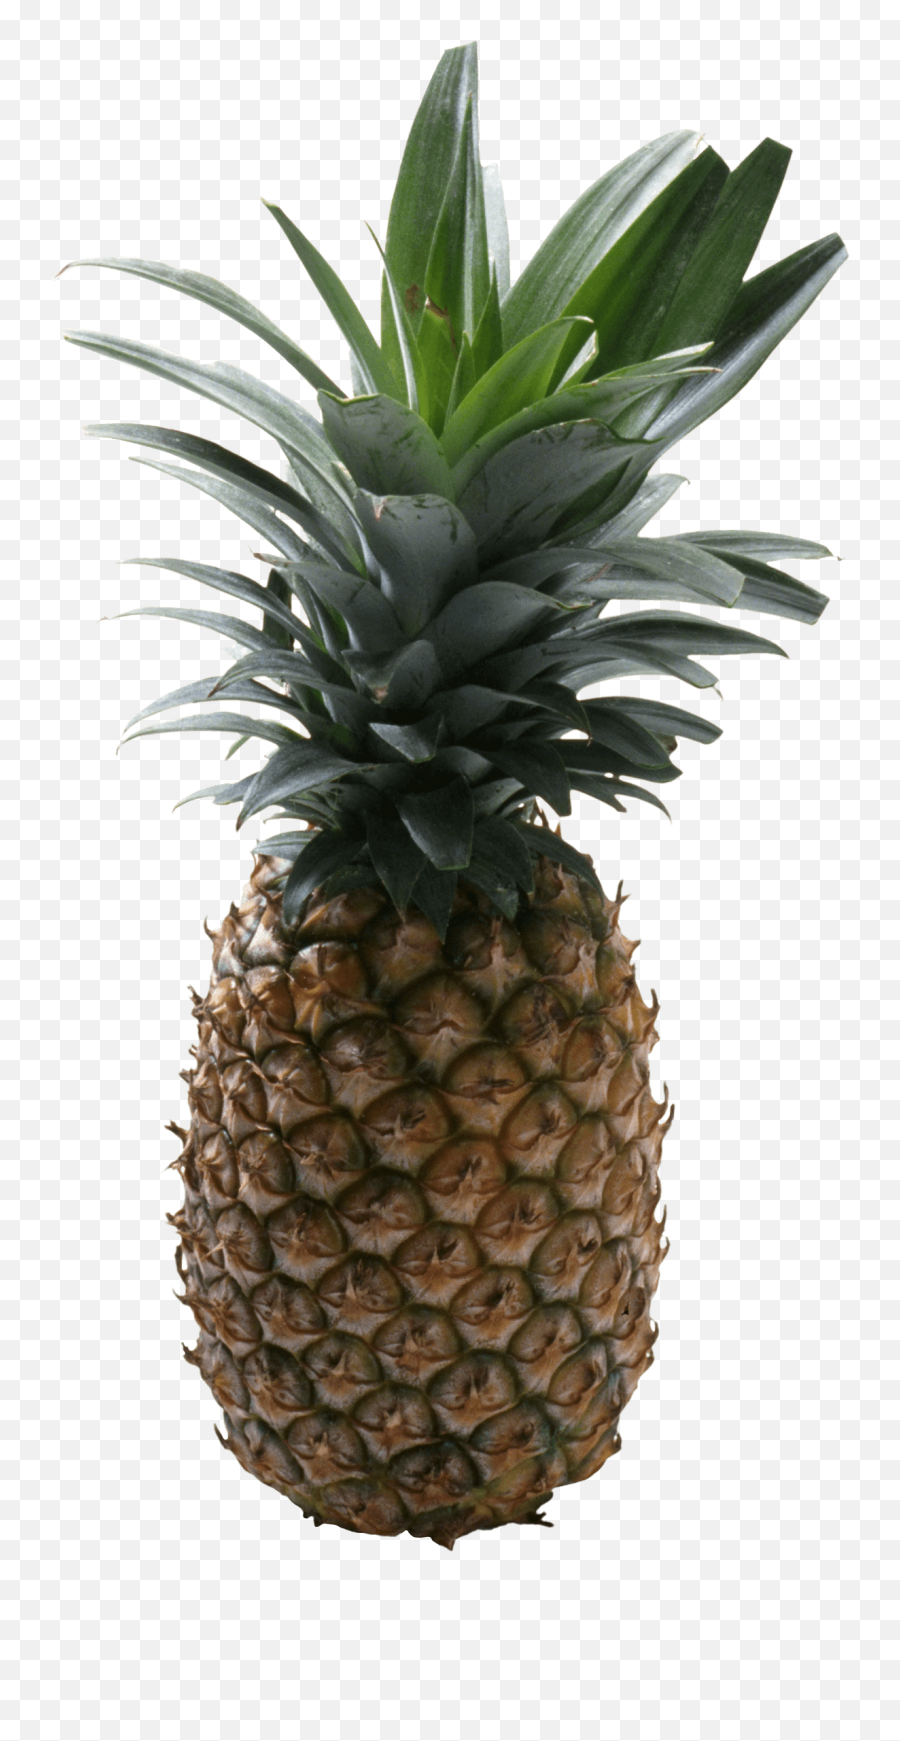 Pineapple Png No Background - Pineapple No Background Emoji,Pineapple Png